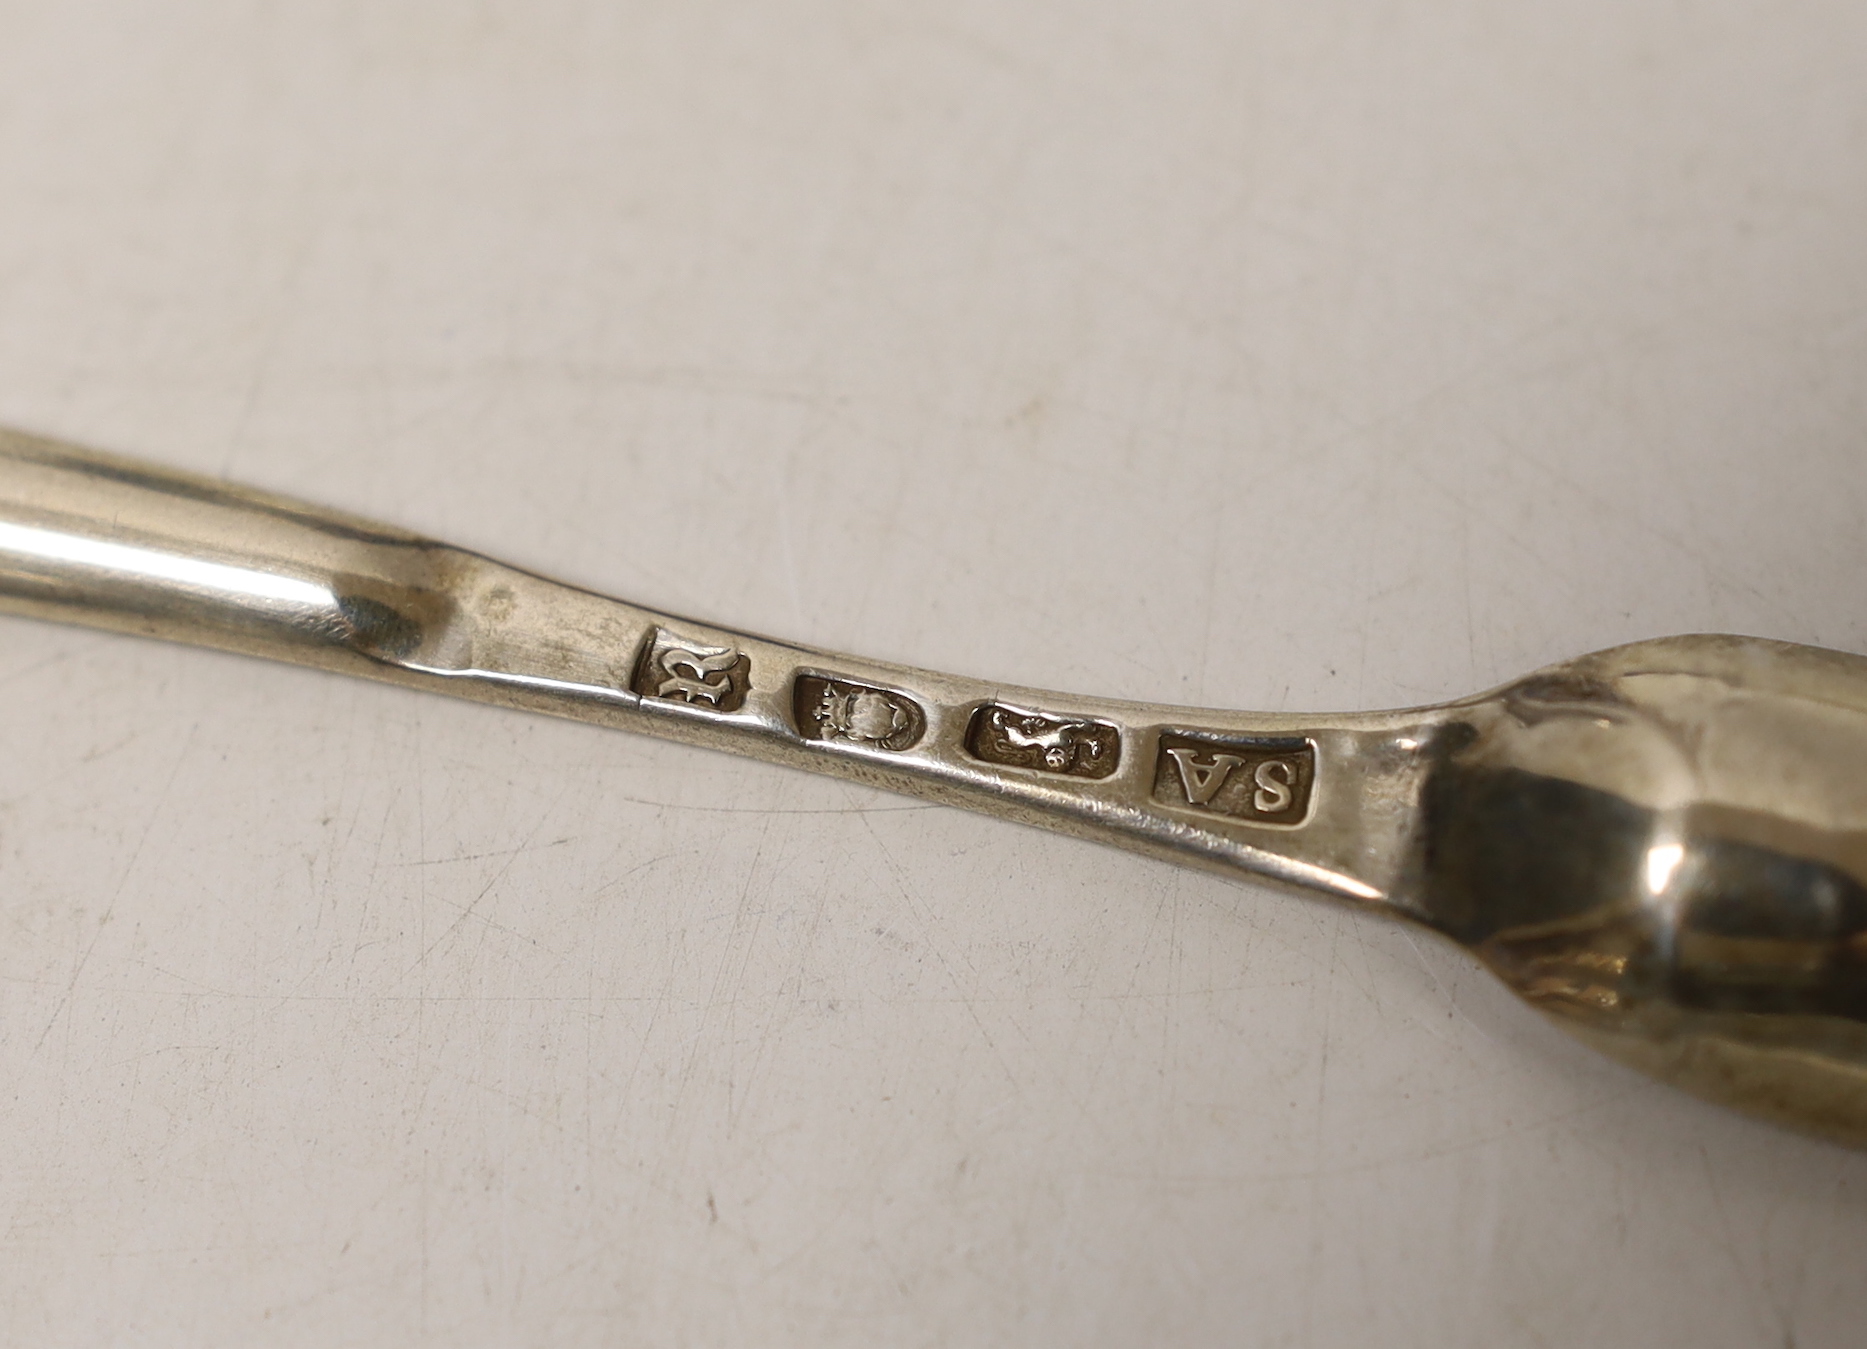 A George III silver marrow scoop, Stephen Adam, London, 1772, 21.5cm, a pair of mid to late 18th century silver sugar nips, a later silver mustard and pair of silver sugar tongs.